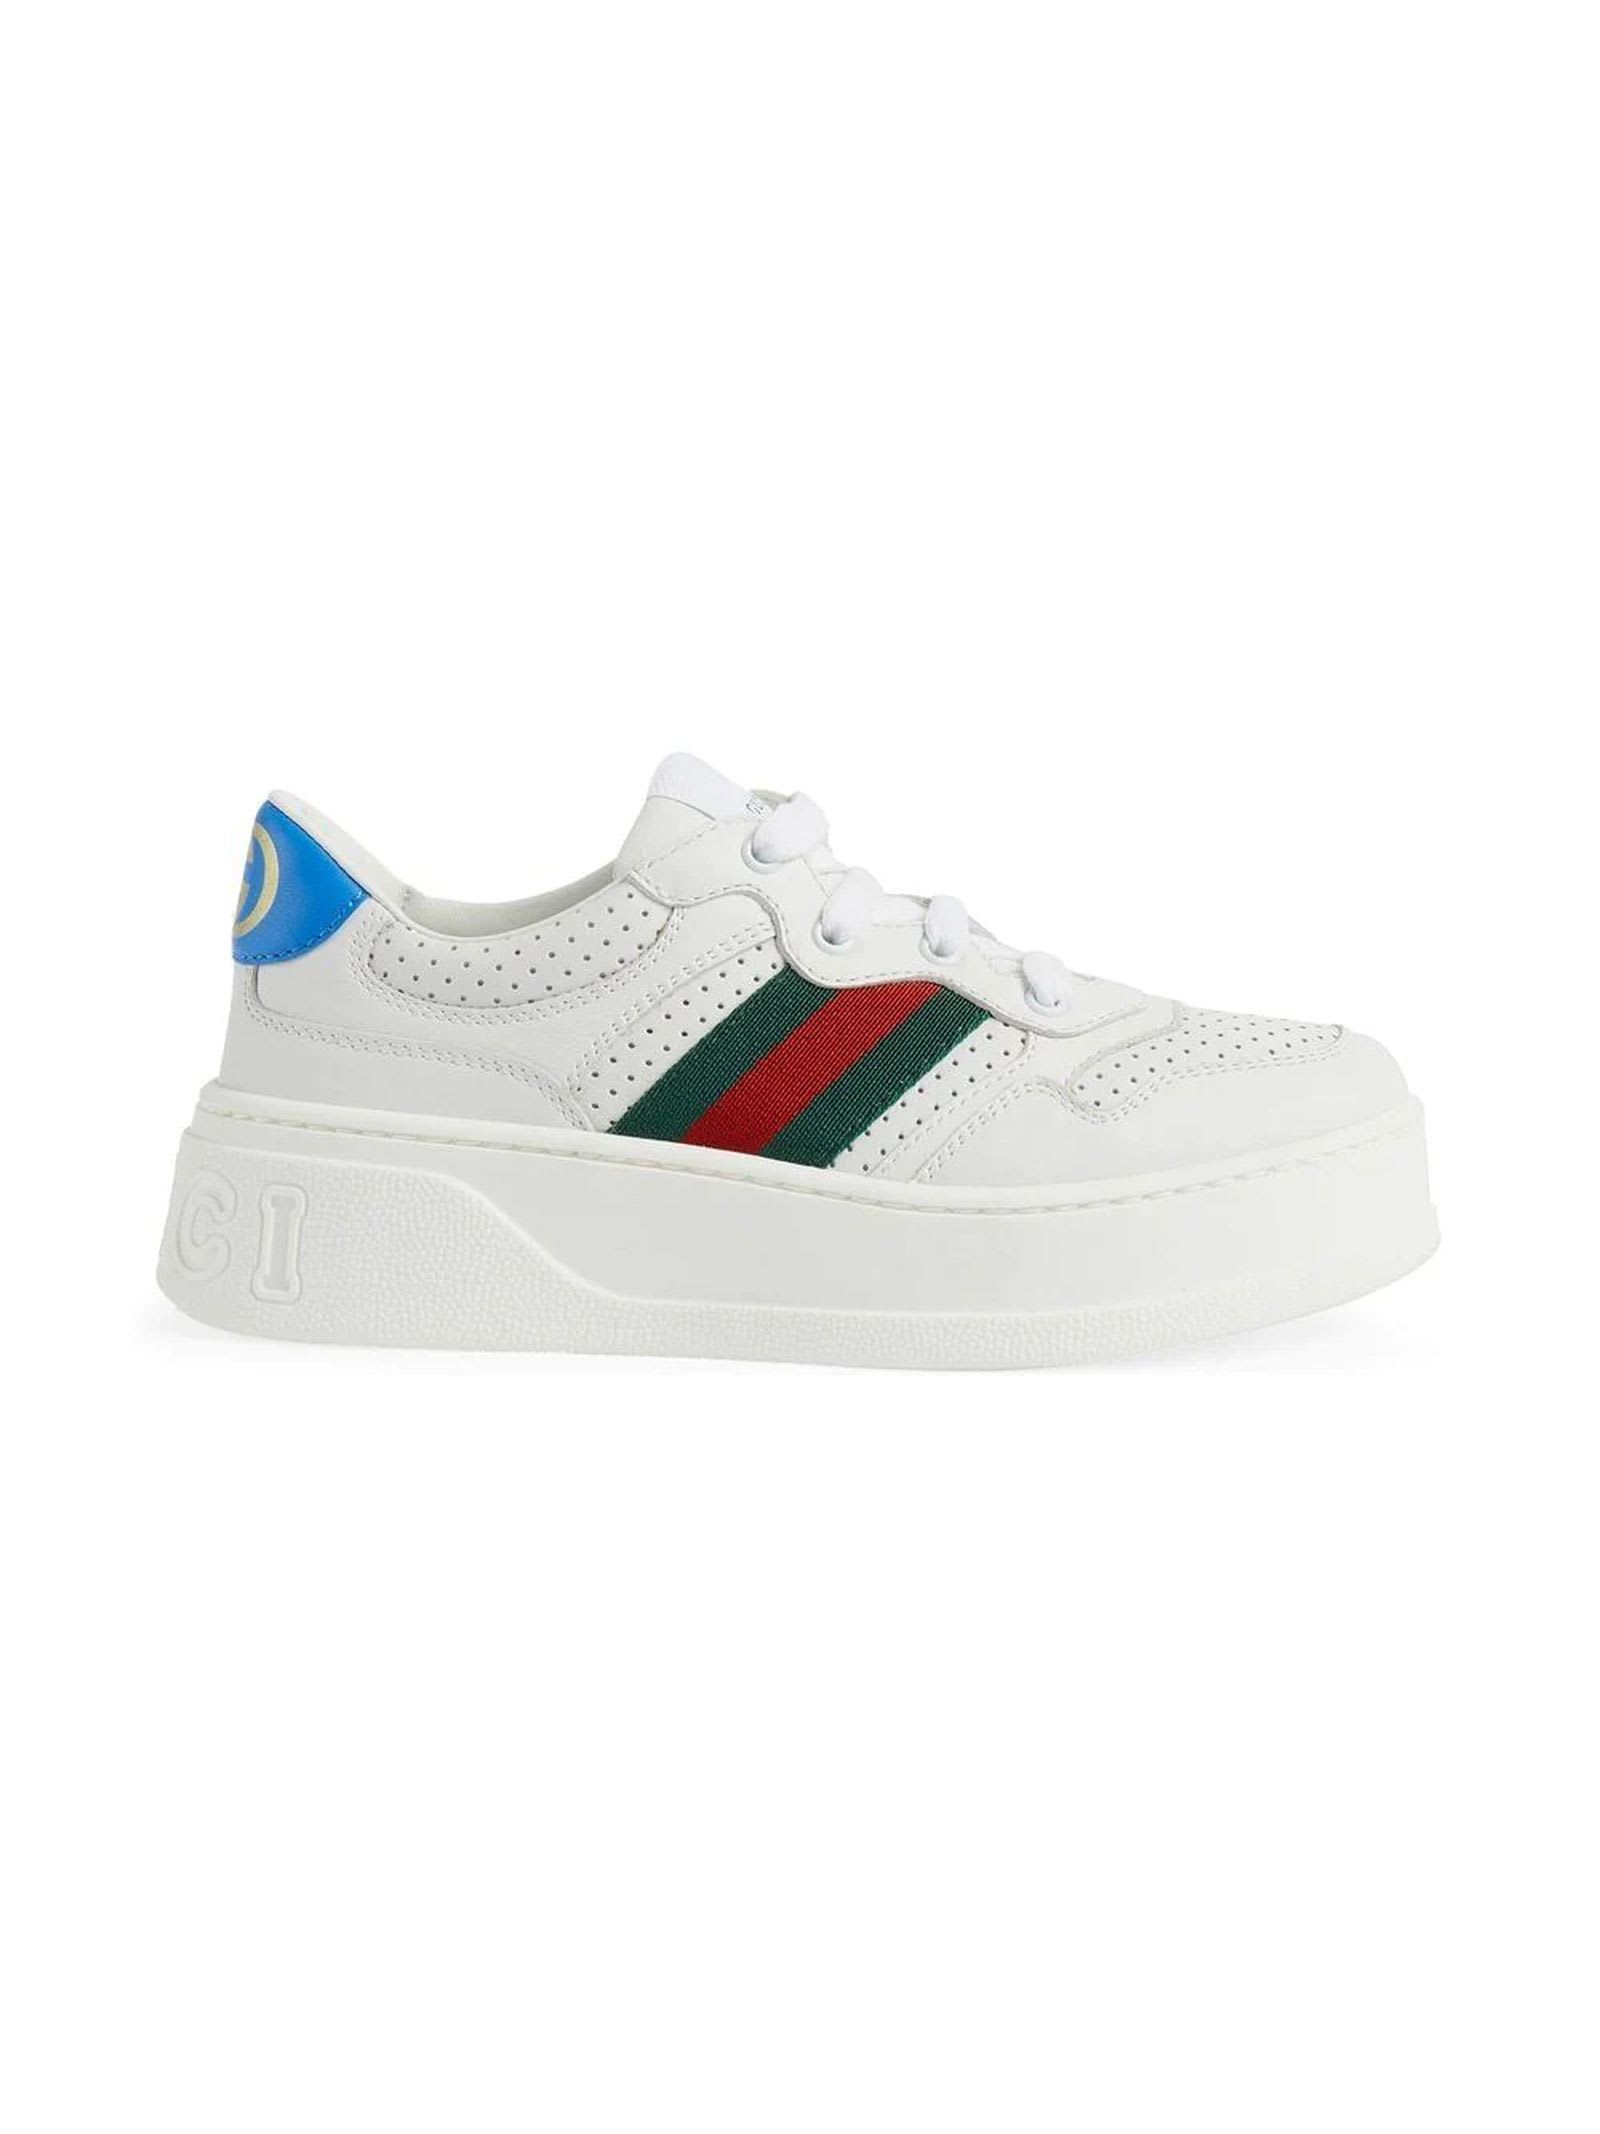 Gucci White Leather Sneakers